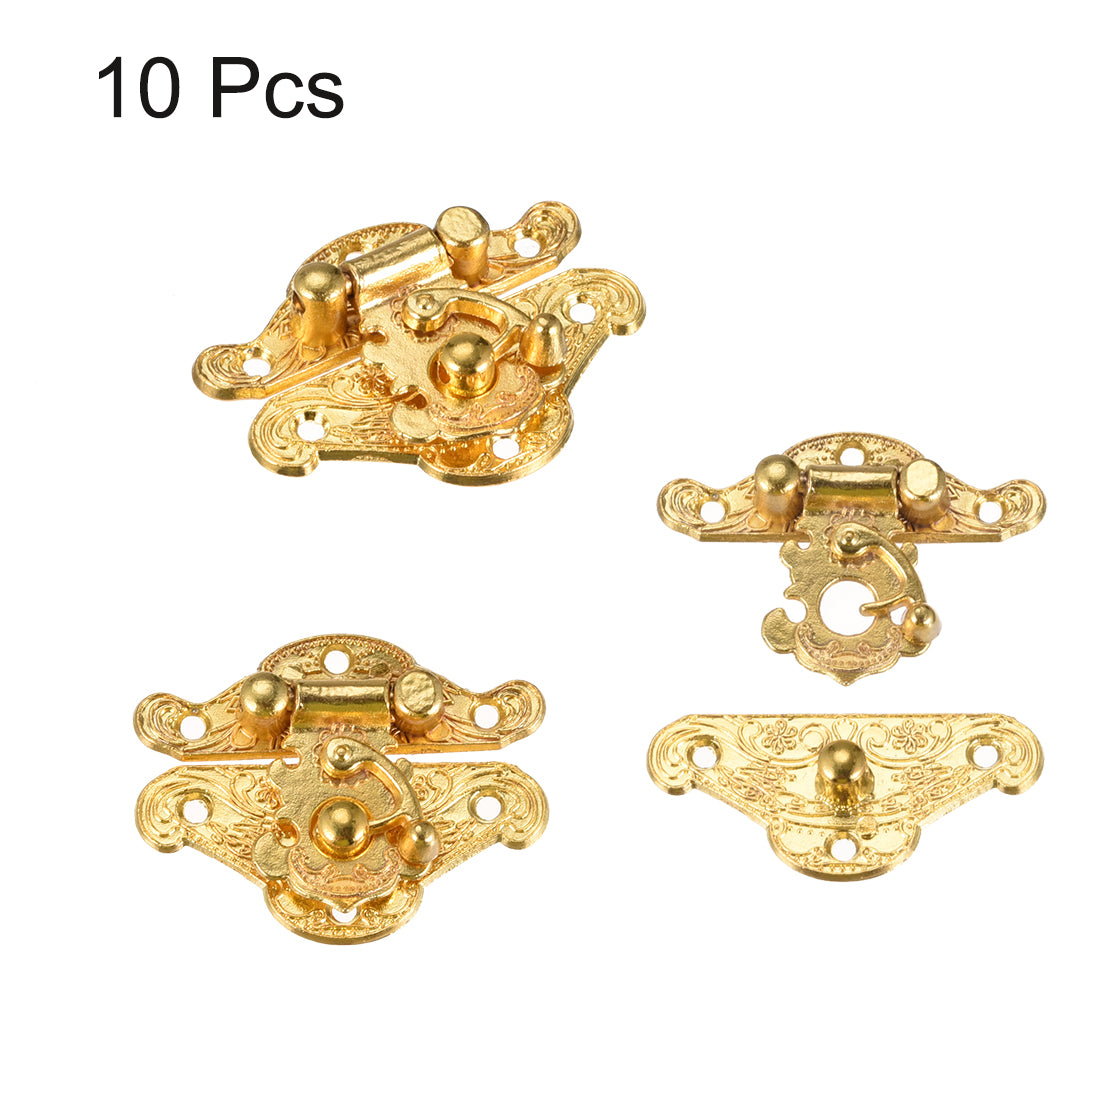 uxcell Uxcell 10 Sets Wood Case Chest Box Rectangle Clasp Closure Hasp Latches Gold Tone 37 x 28mm